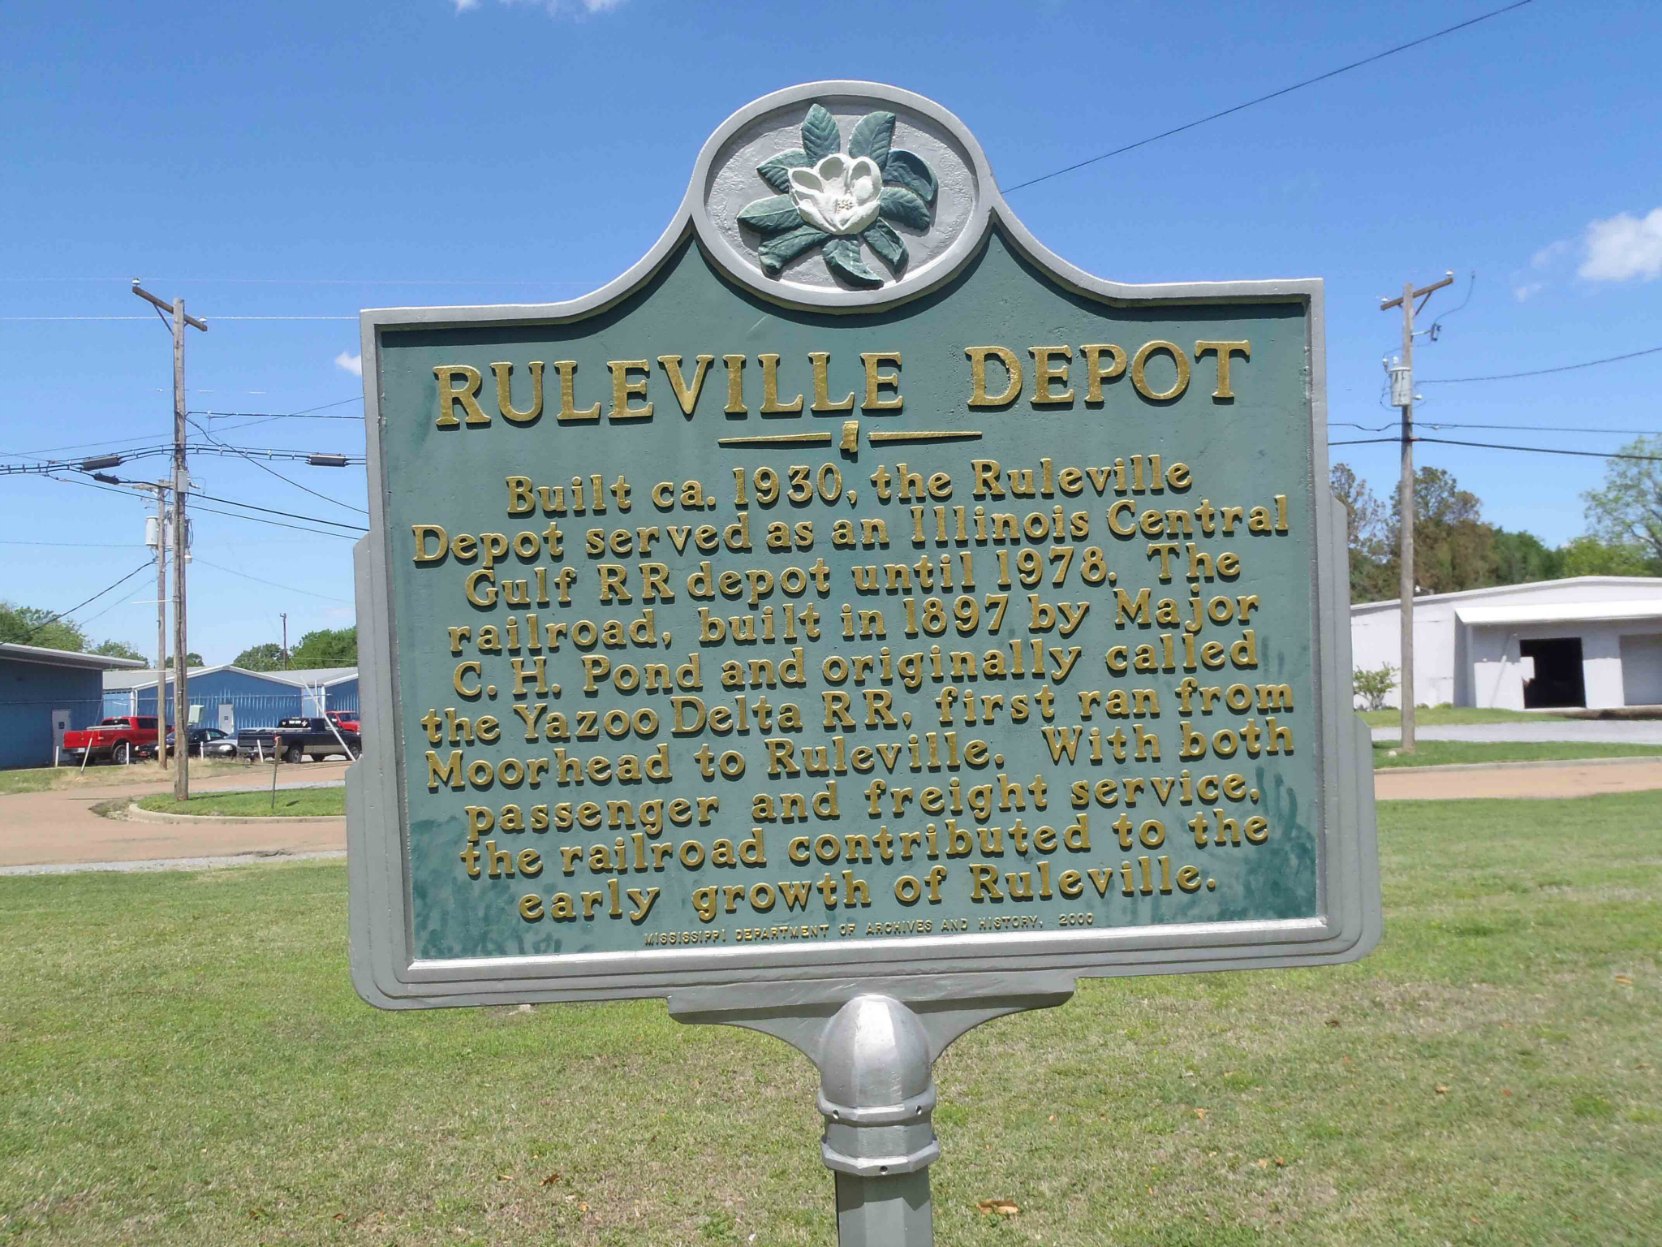 The Mississippi Department of Archives & History marker for the Ruleville Rail Depot building, now the Ruleville Chamber of Commerce, Ruleville, Sunflower County, Mississippi.